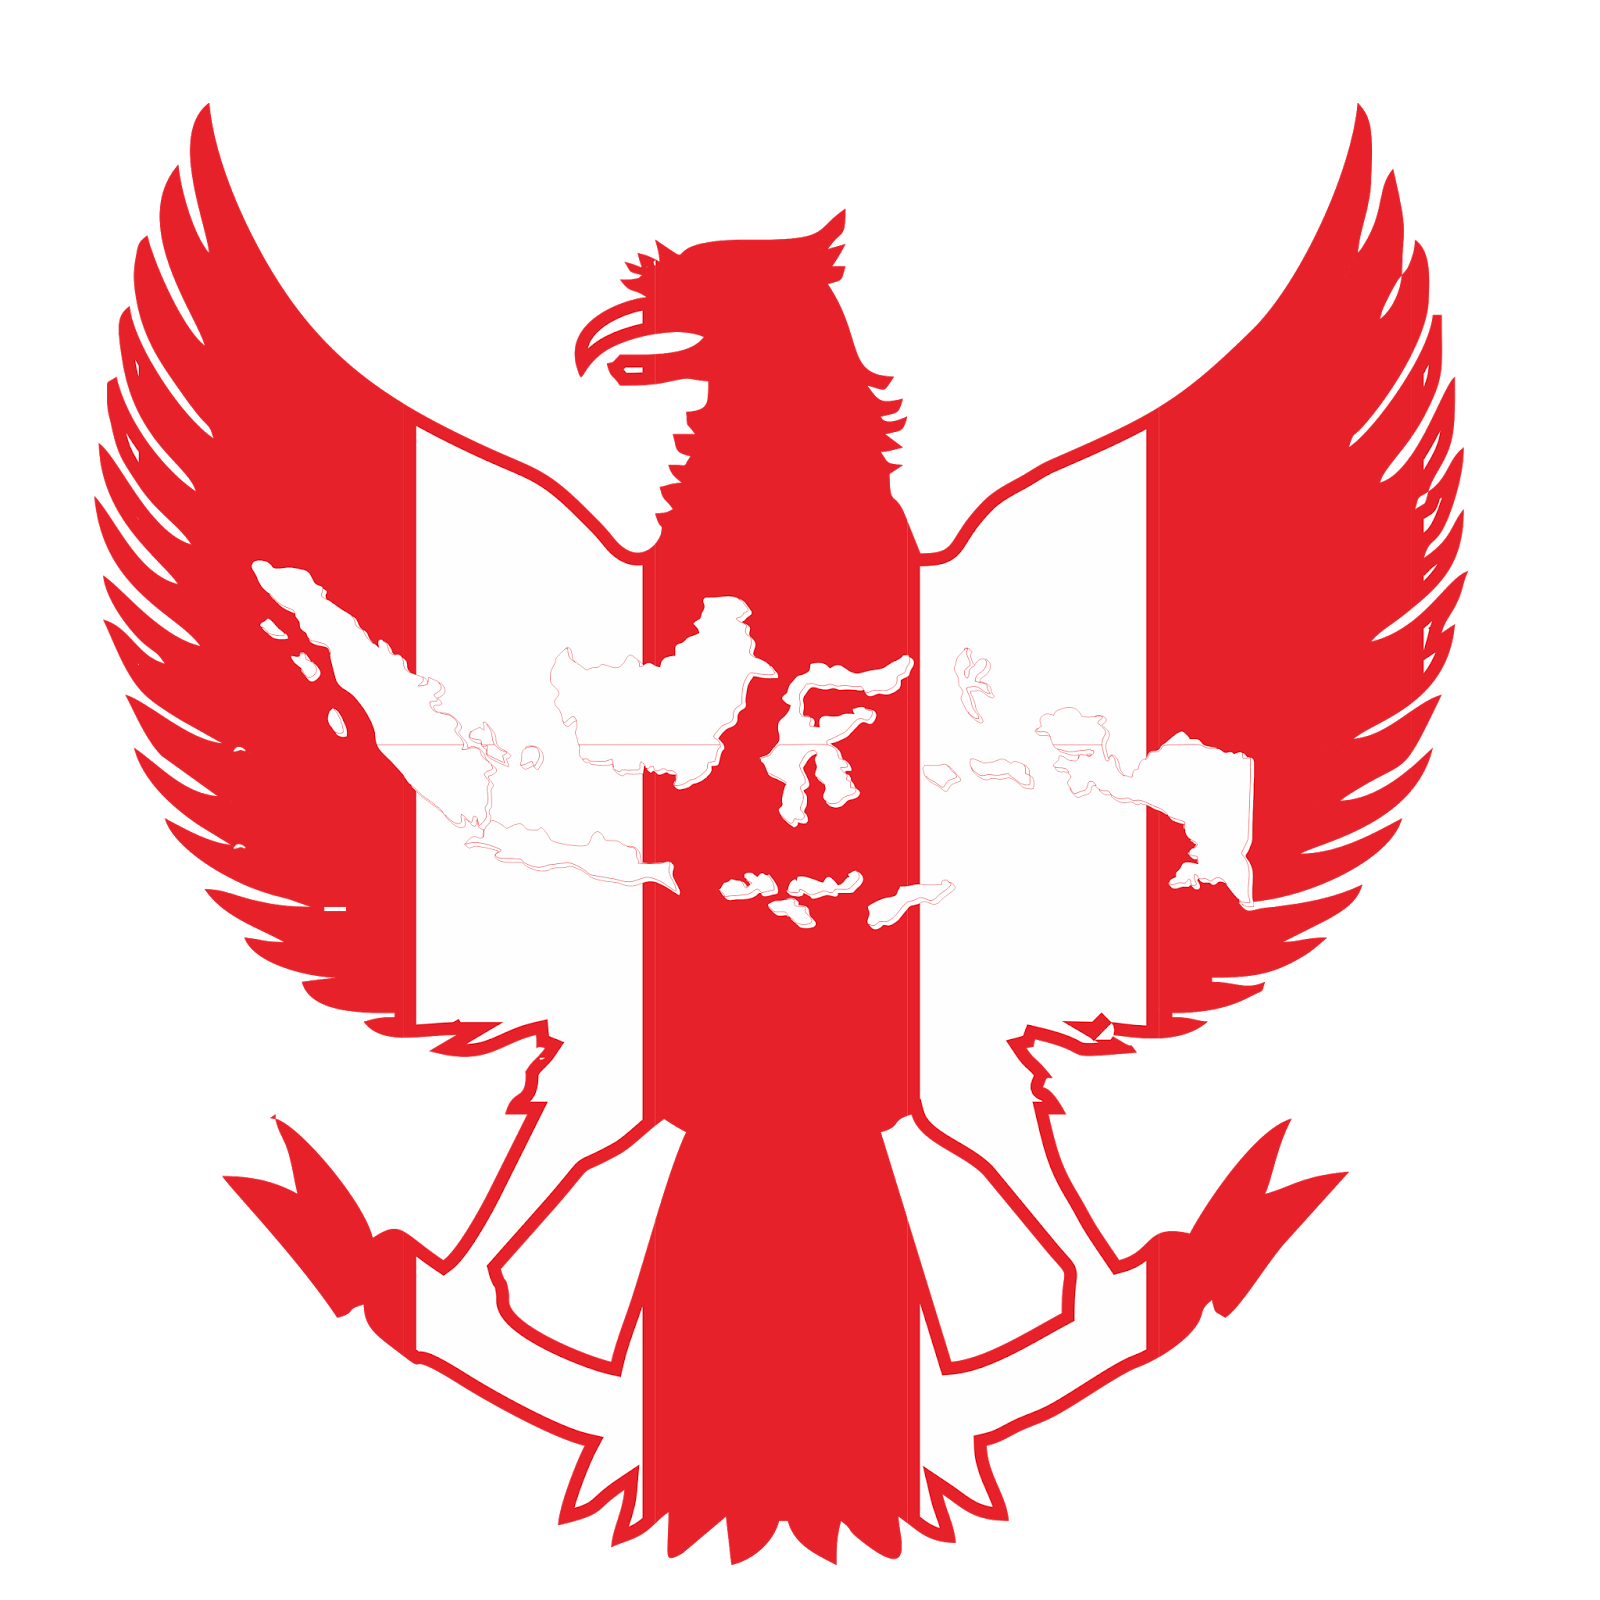 The best free Garuda vector images. Download from 37 free vectors of